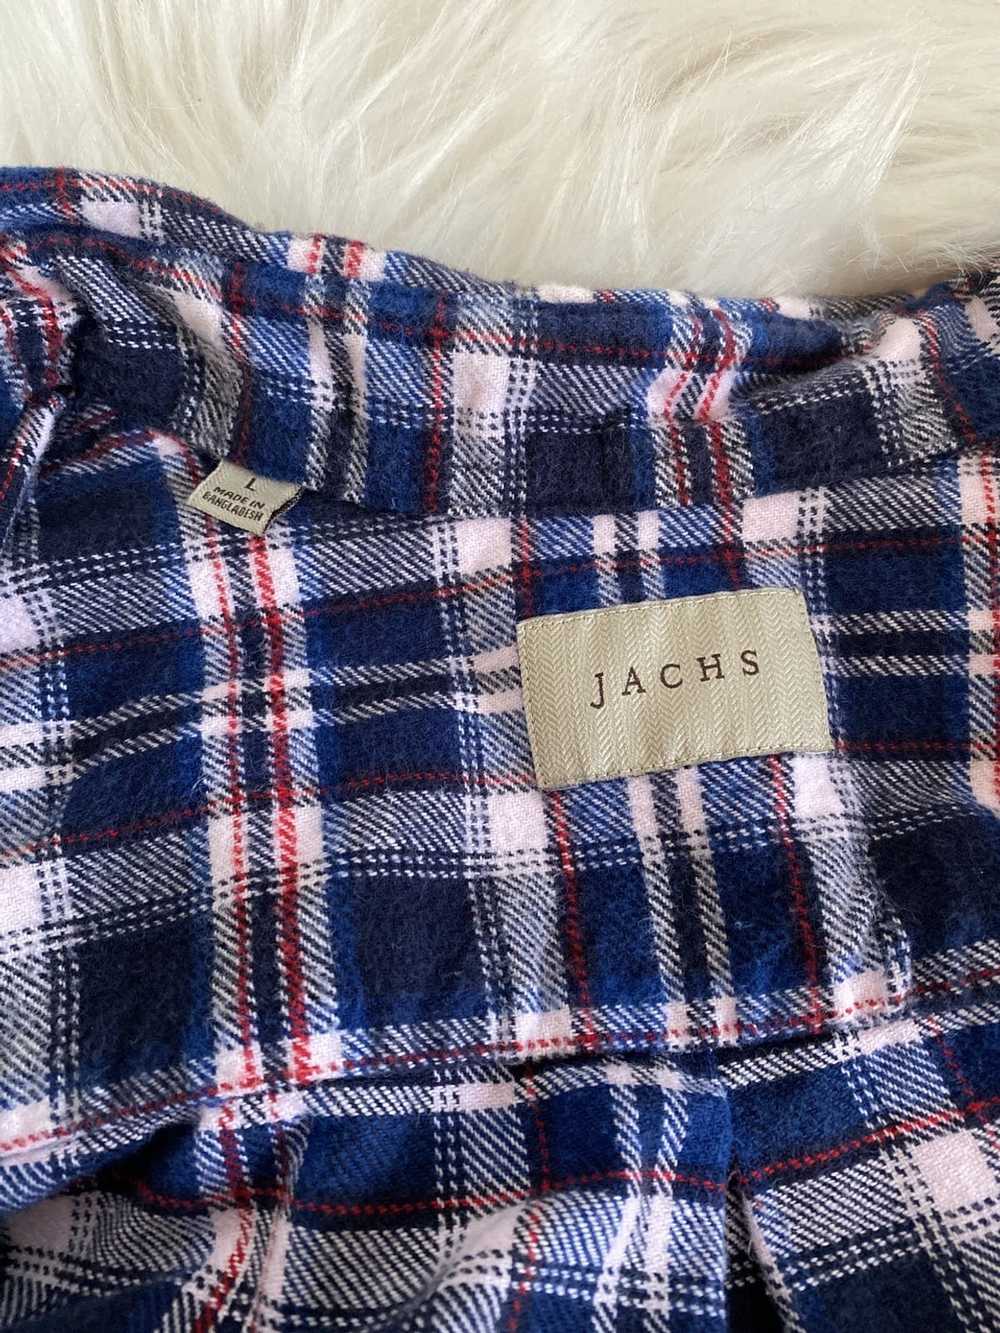 J.A.C.H.S. Mfg. Co. Flannel - image 3